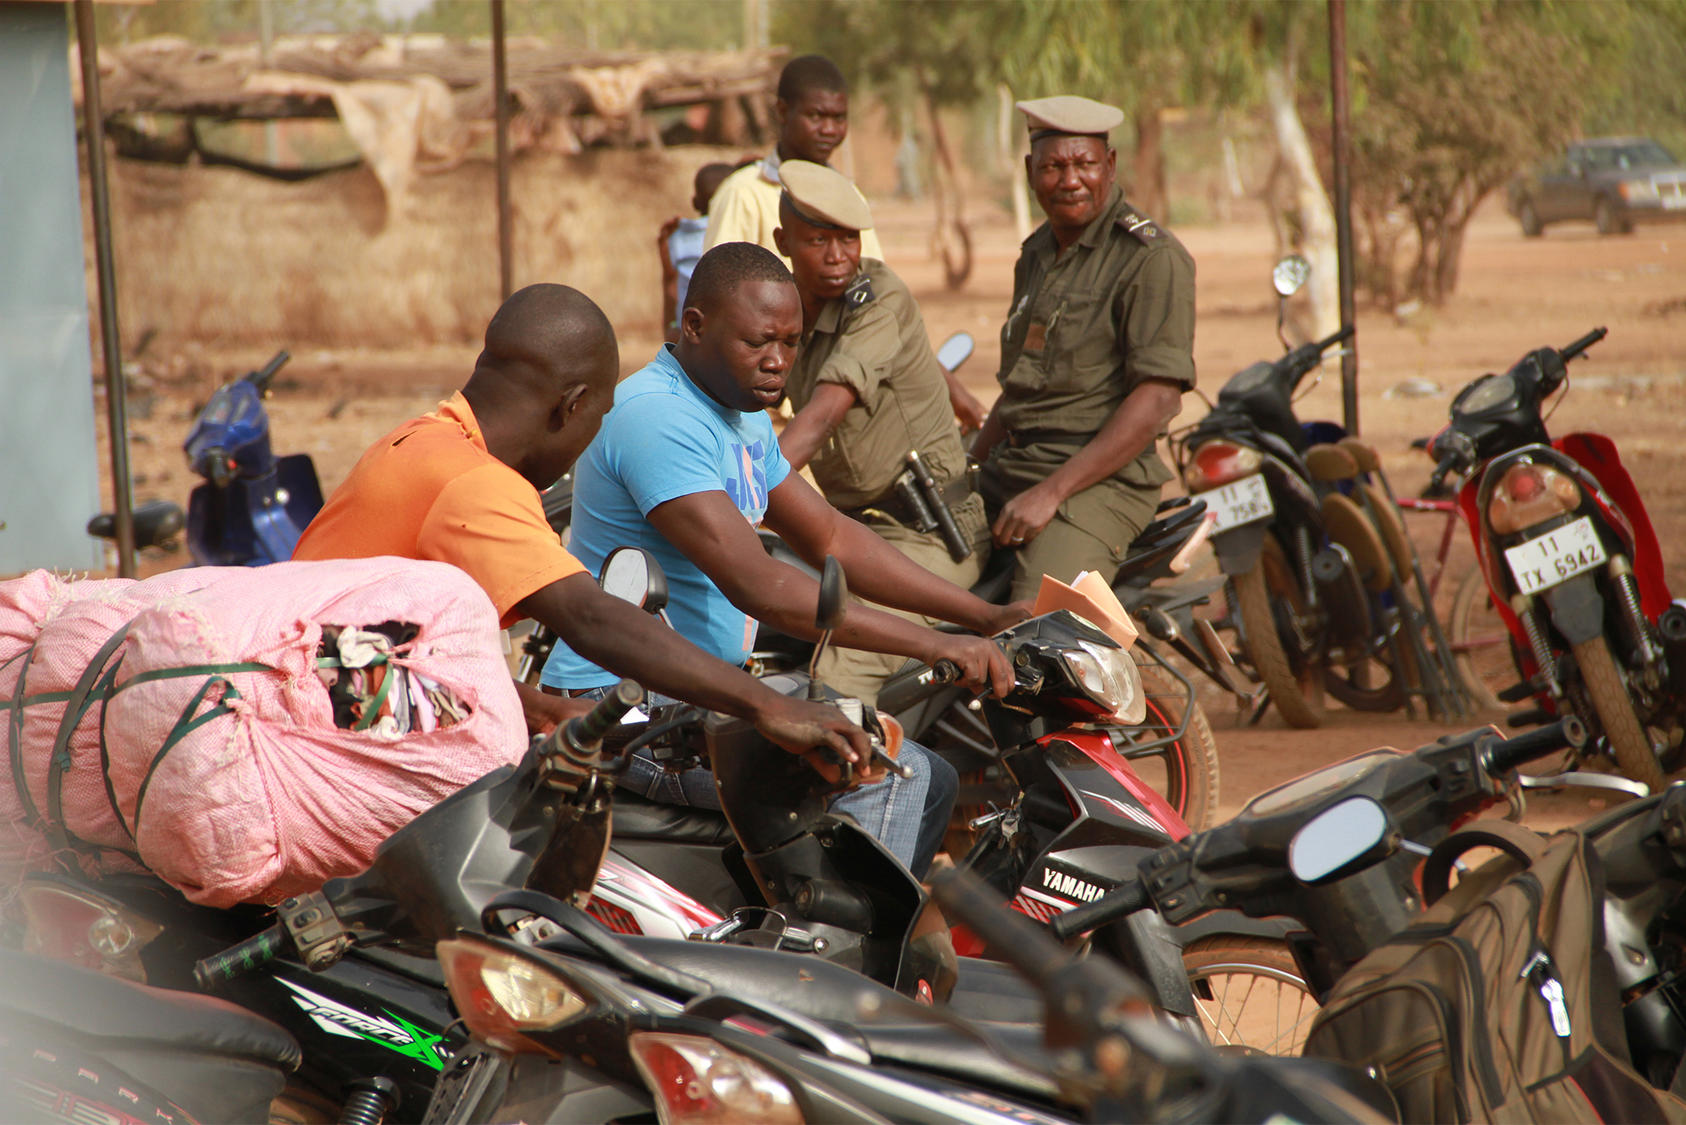 Two security officers on motorcycles in Burkina Faso - where USIP applied a systems thinking approach to help improve citizens' trust in the judiciary (USIP photo).